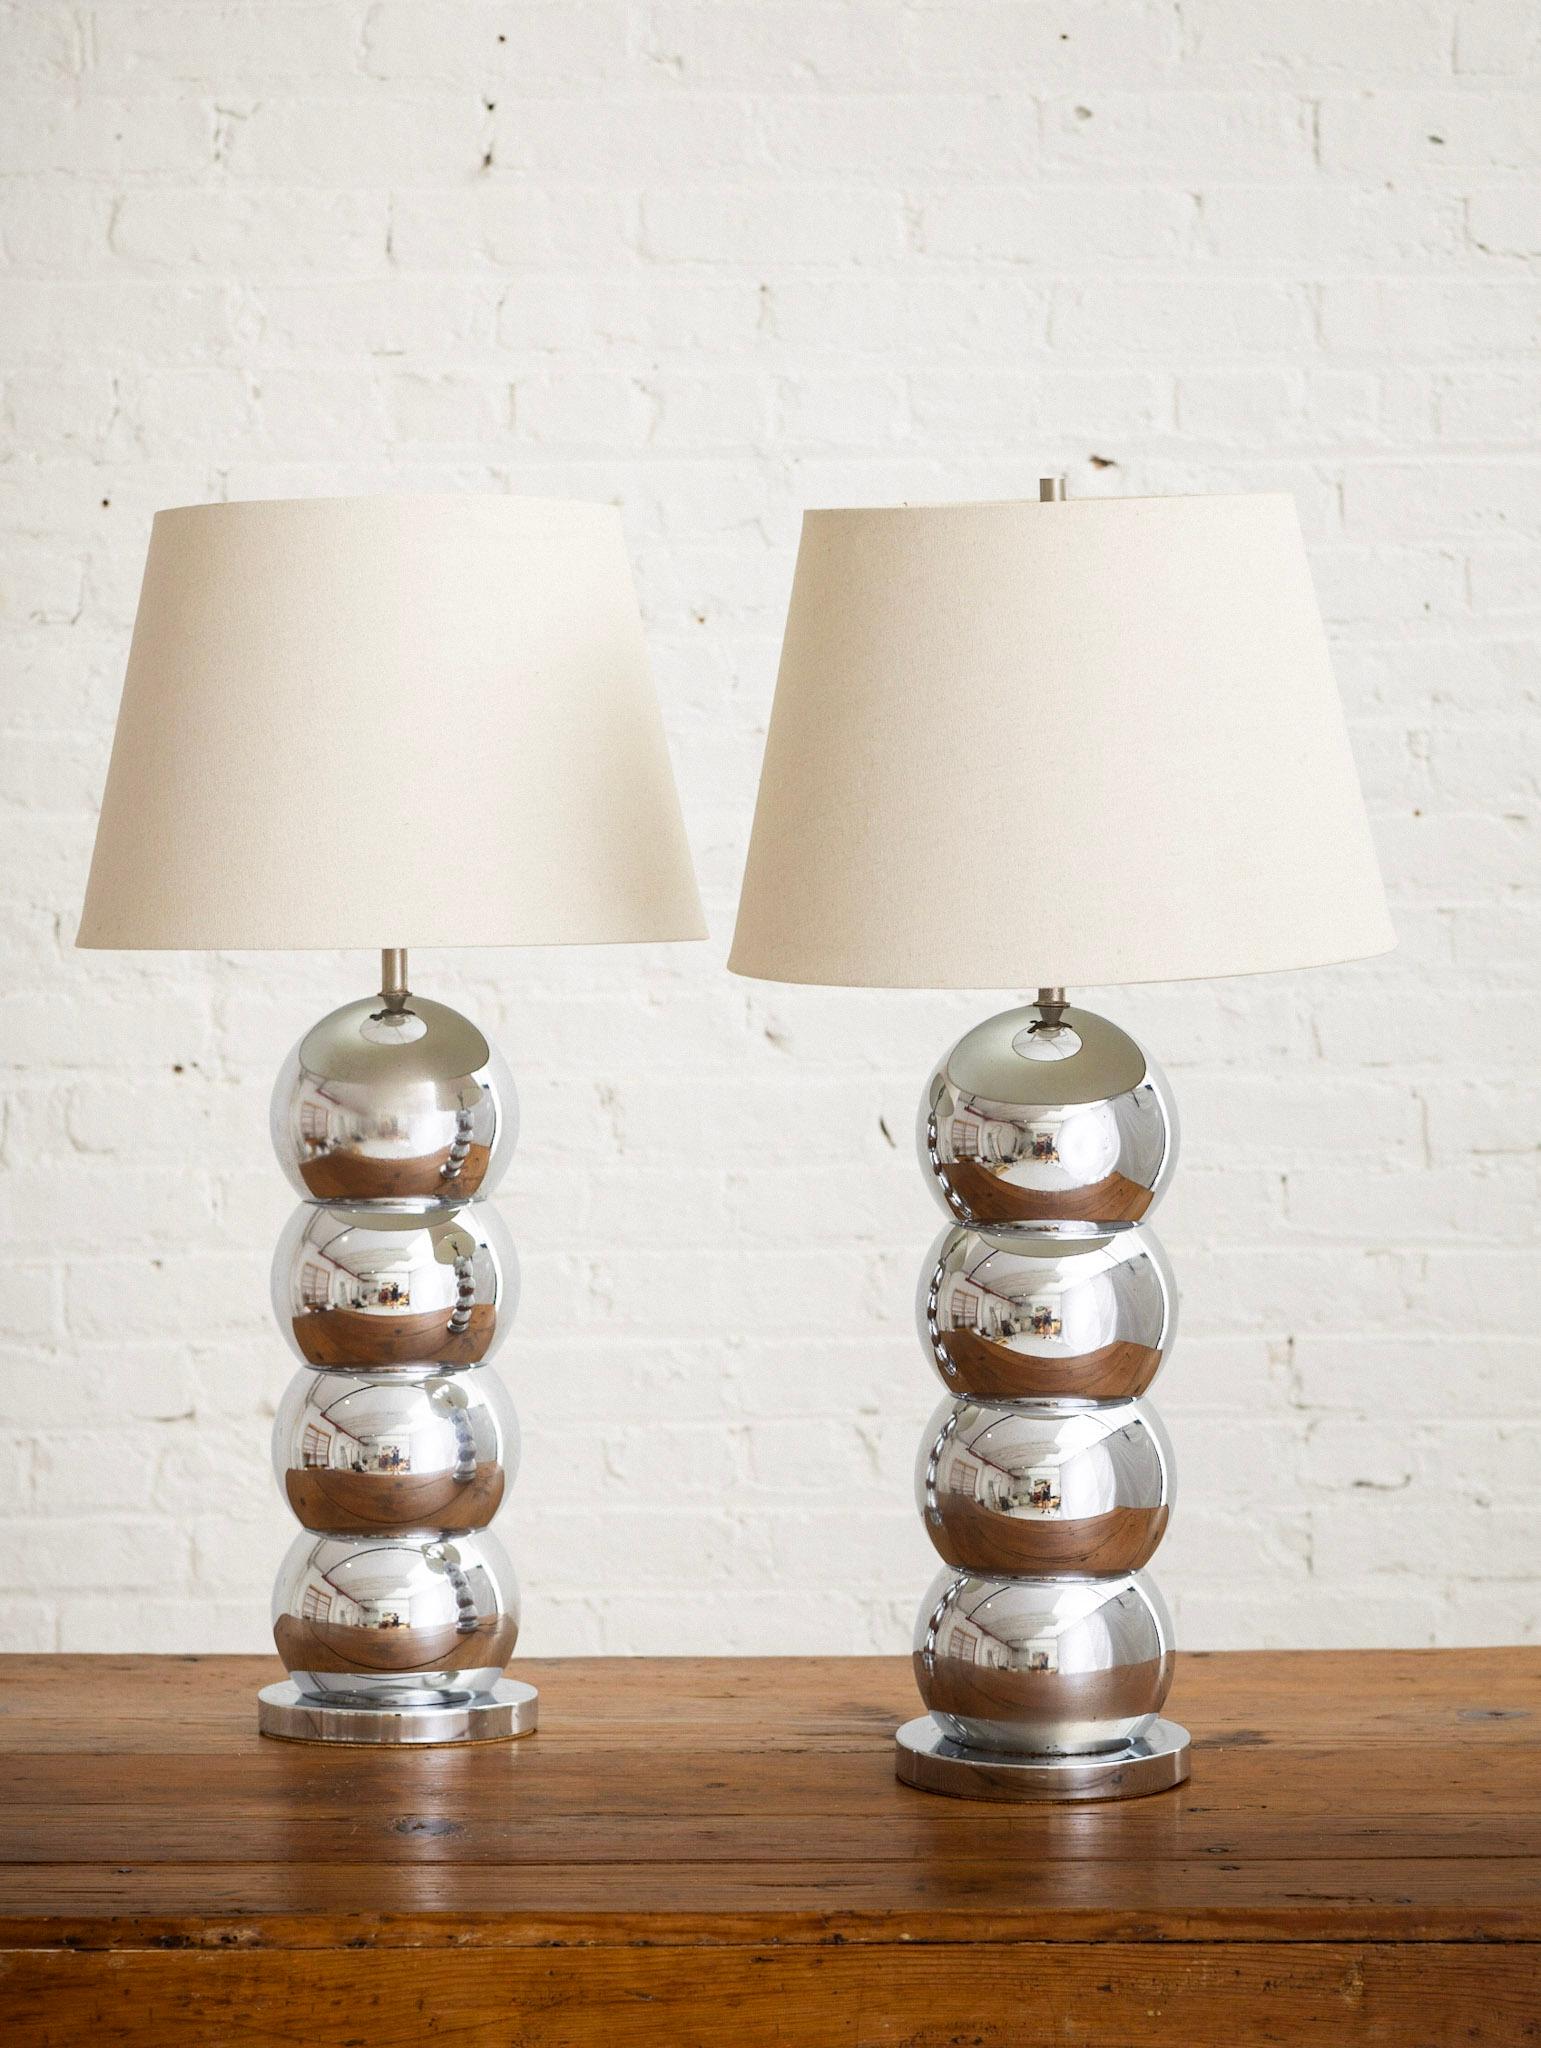 Pair of Mid-Century chrome stacked ball form lamps. Styled after George Kovacs’ “Caterpillar” lamp. Lamp shades not included.
Measurements are of each lamp including the harp and finial. Lamp without the harp measures 22.5“ high.